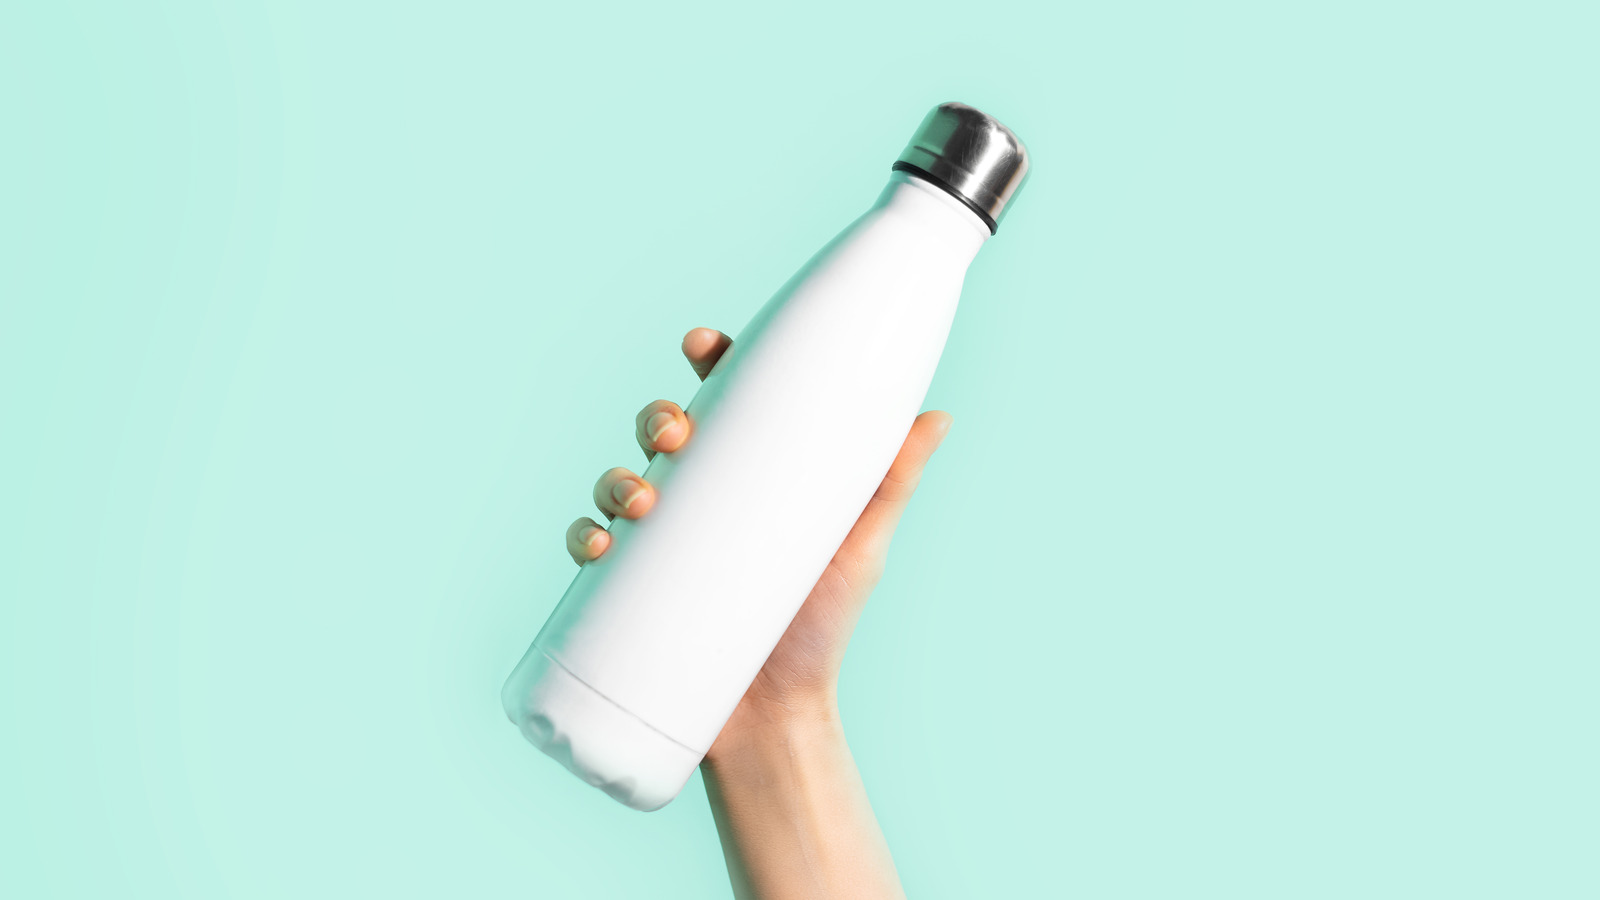 https://www.thedailymeal.com/img/gallery/the-best-way-to-thoroughly-clean-your-hydro-flask/l-intro-1692290284.jpg